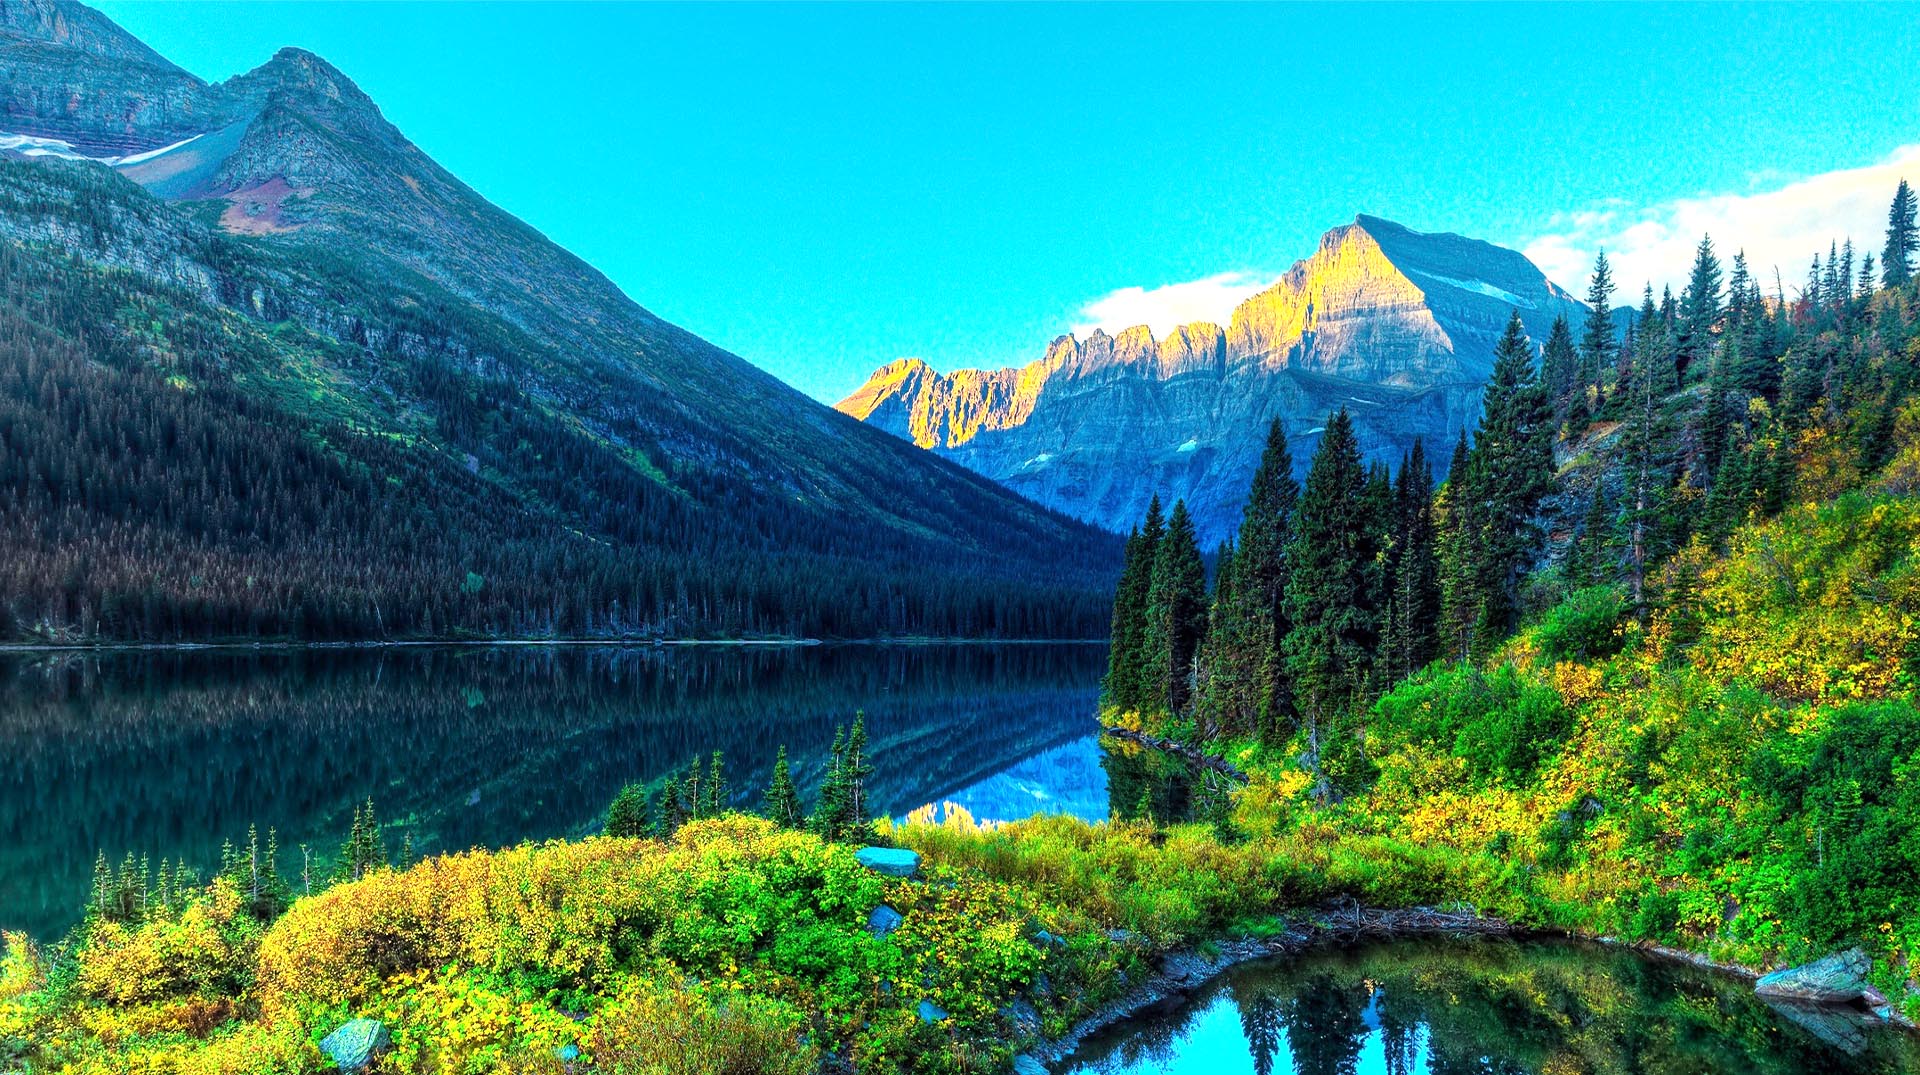 A lake with mountains in the background and trees.